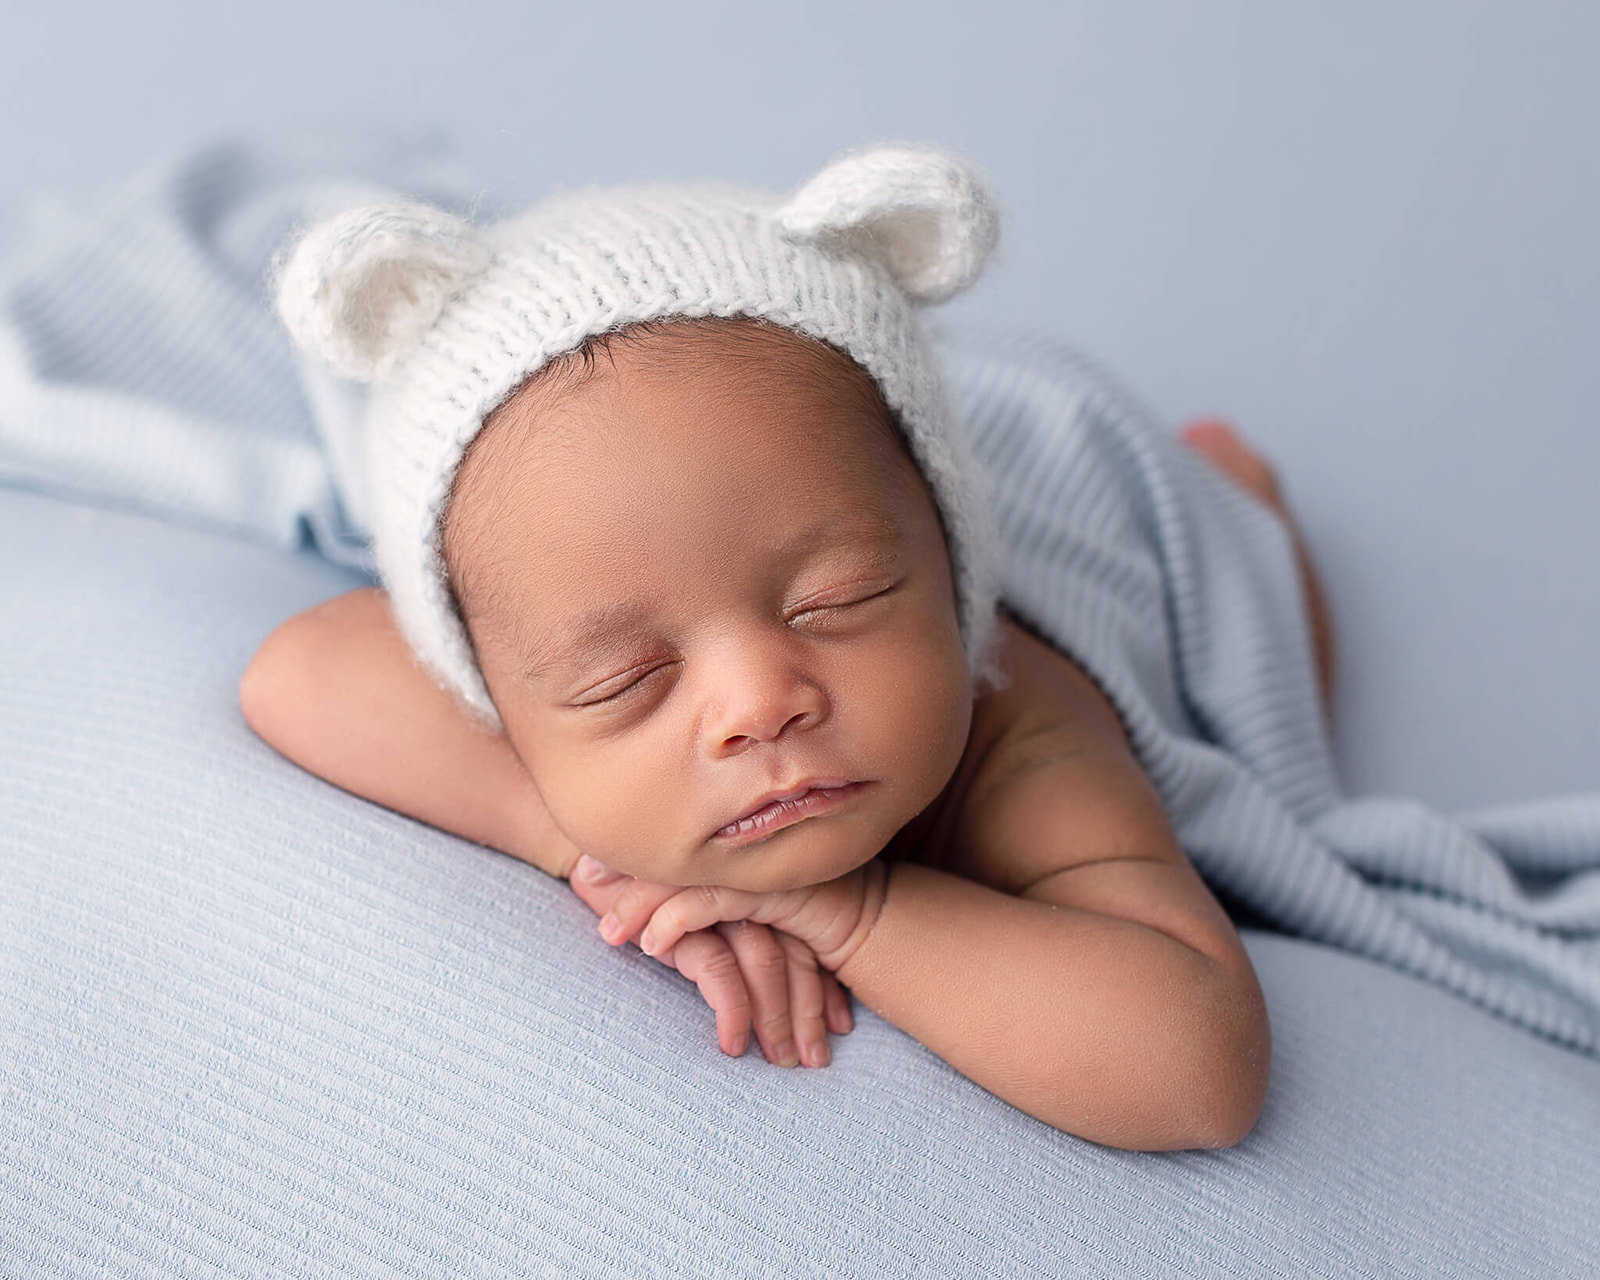 sleeping newborn during newborn photography session with white knit bear hat on head and blue blanket
